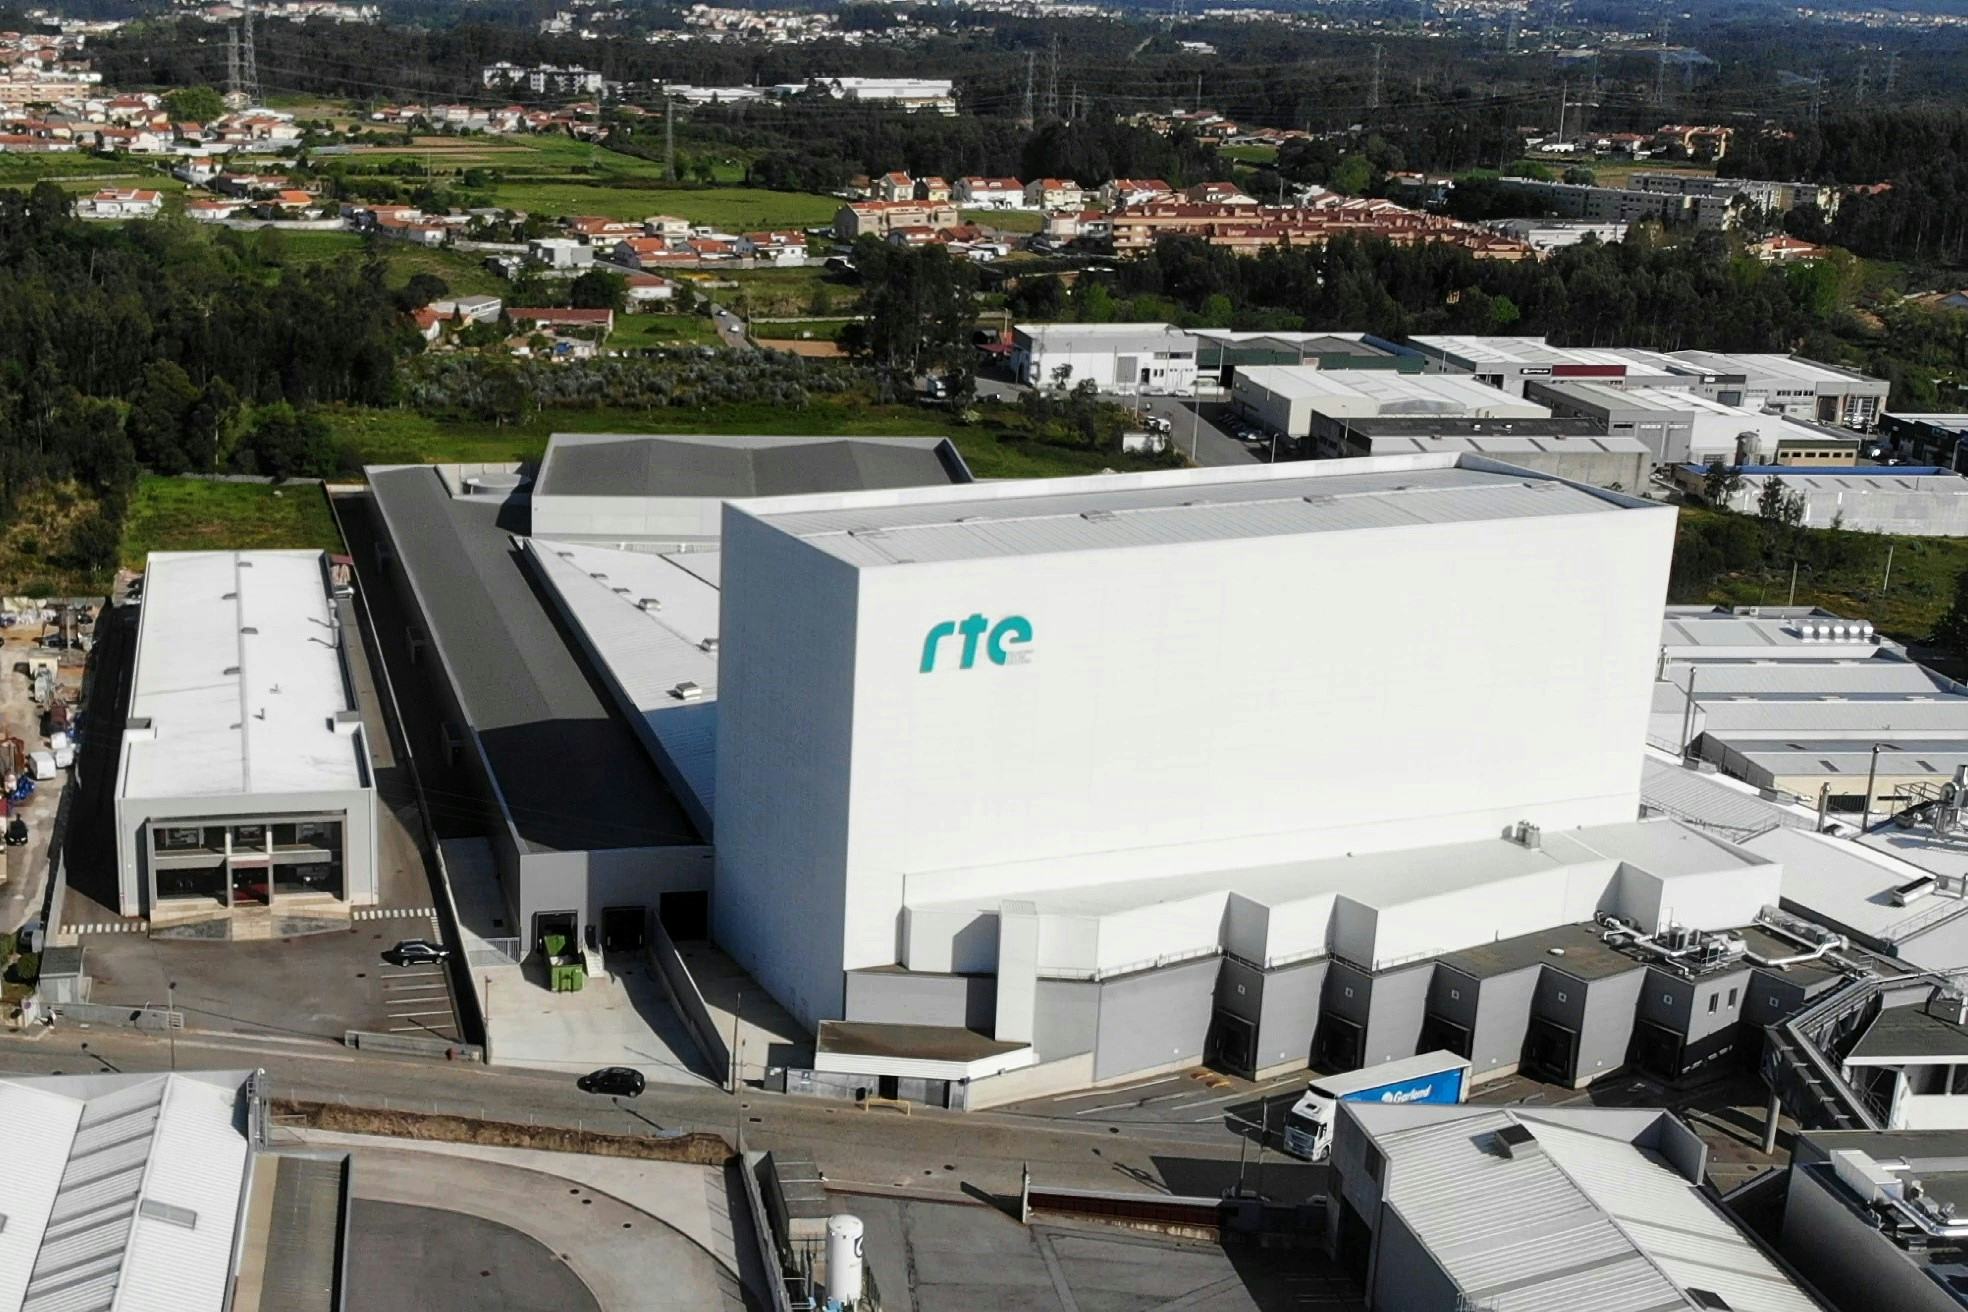 The RTE headquarters and production facility in Serzedo has not only been expanded, but also extended to include a nearby e-bike factory. - Photo RTE 